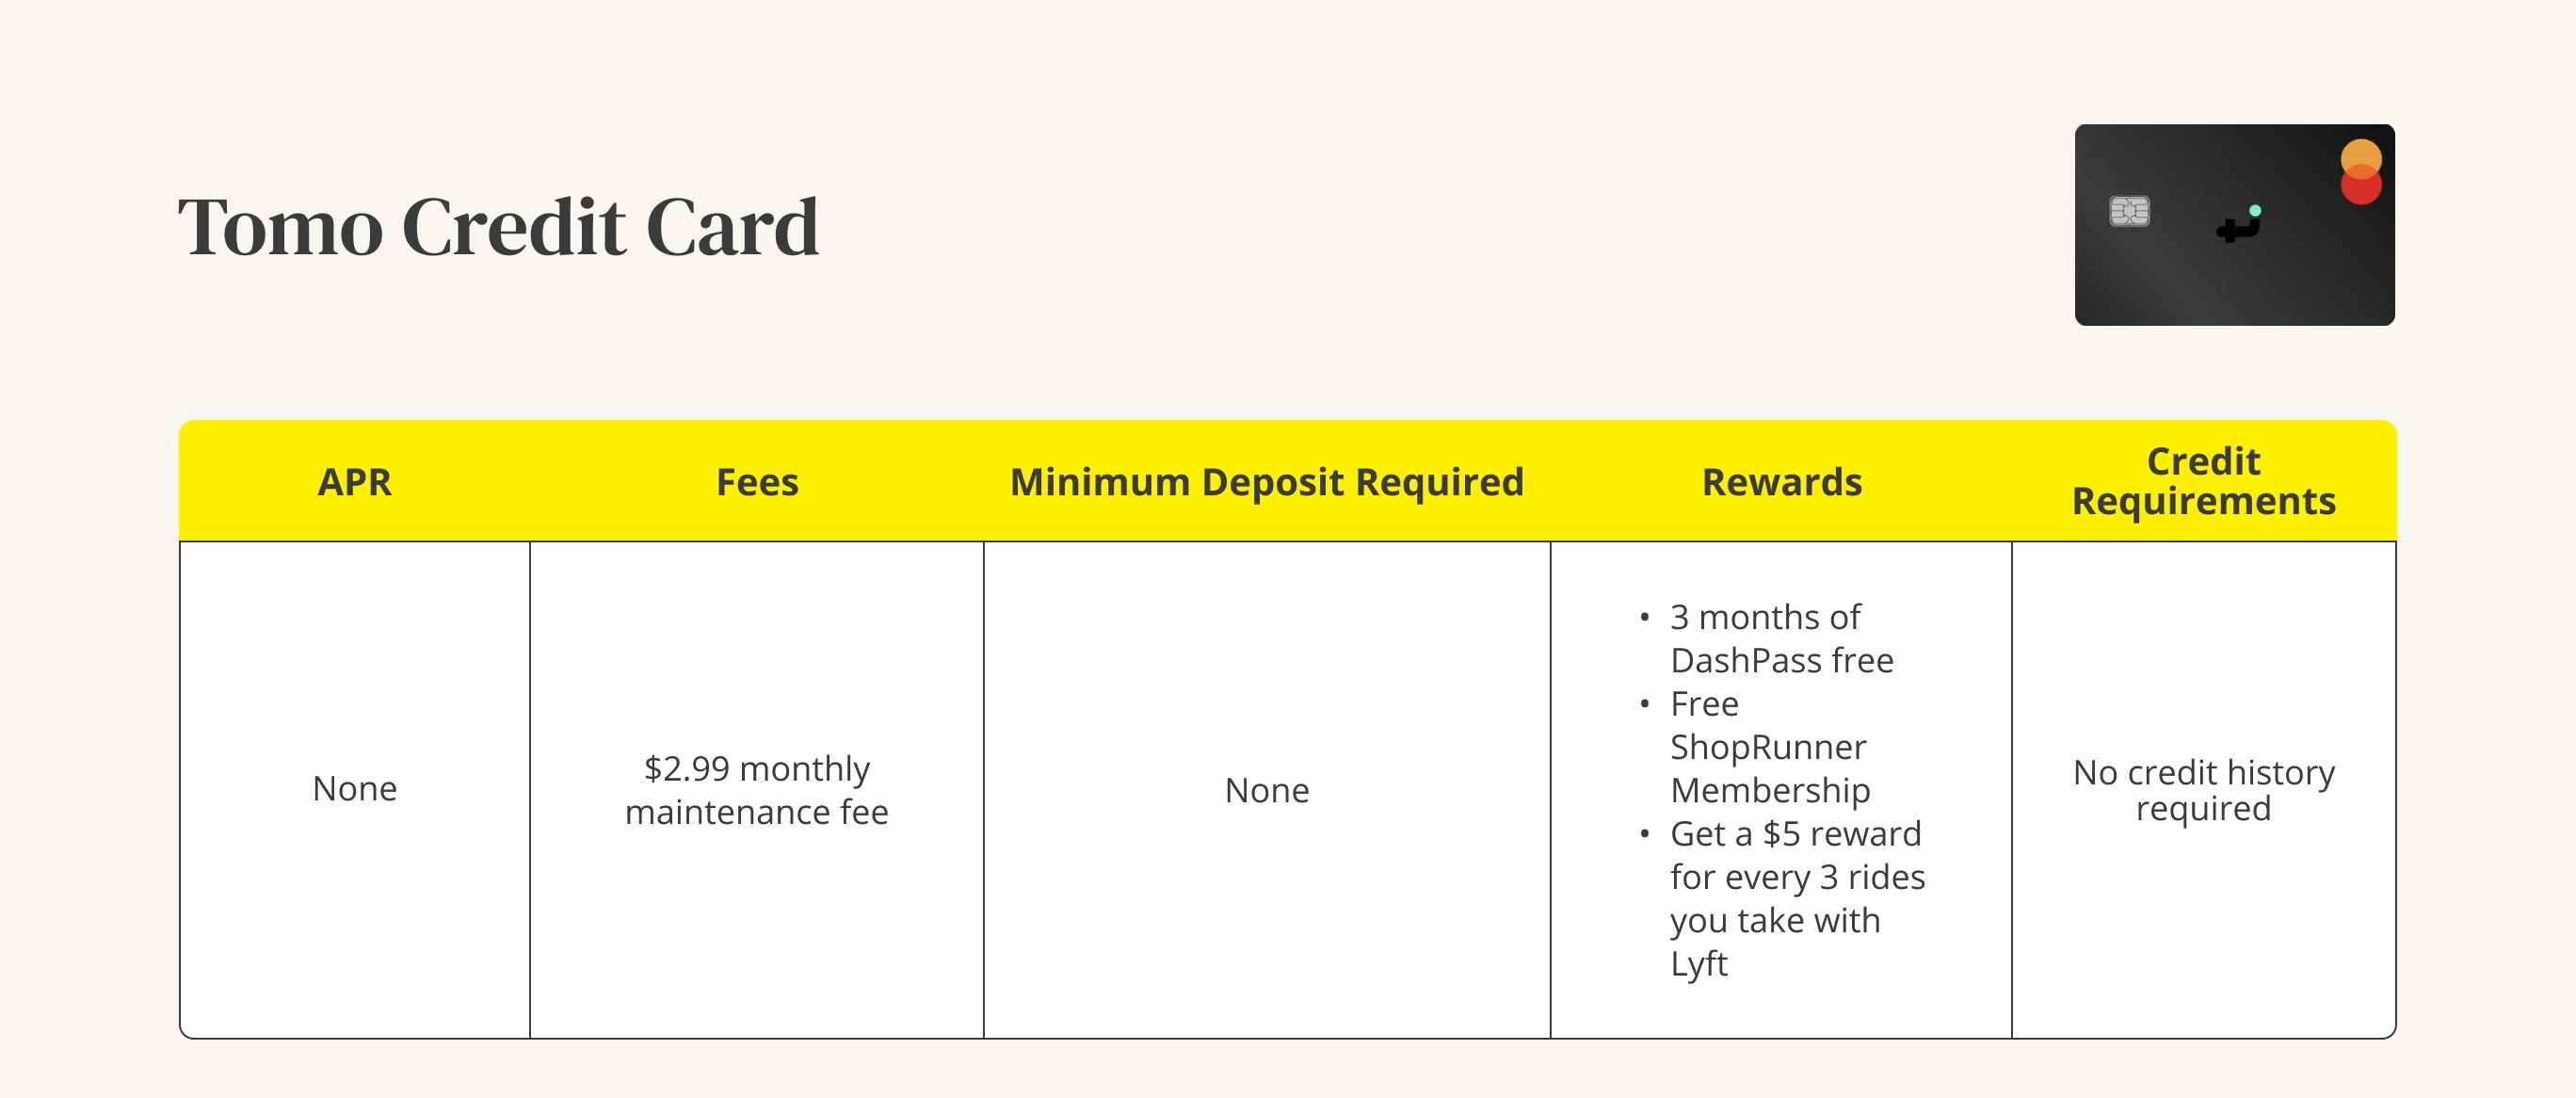 A graphic showing the APR, fees, minimum deposit, rewards, and credit requirements for a Tomo credit card